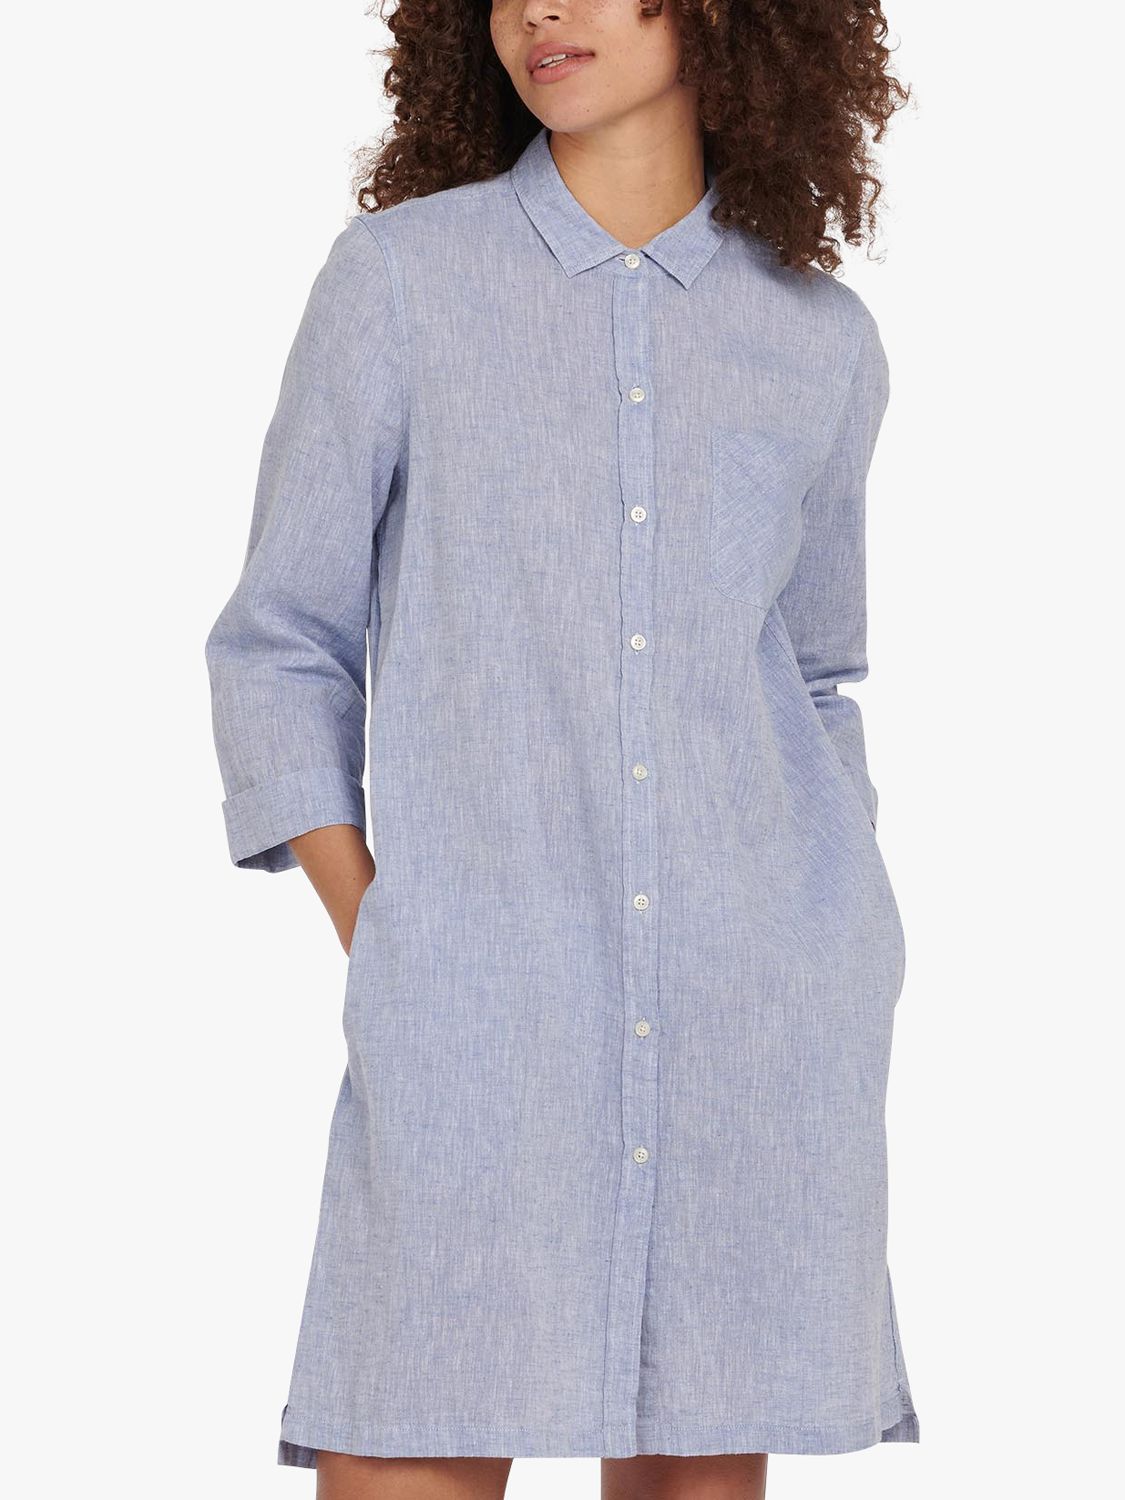 Barbour Seaglow Shirt Dress, Chambray Blue at John Lewis & Partners